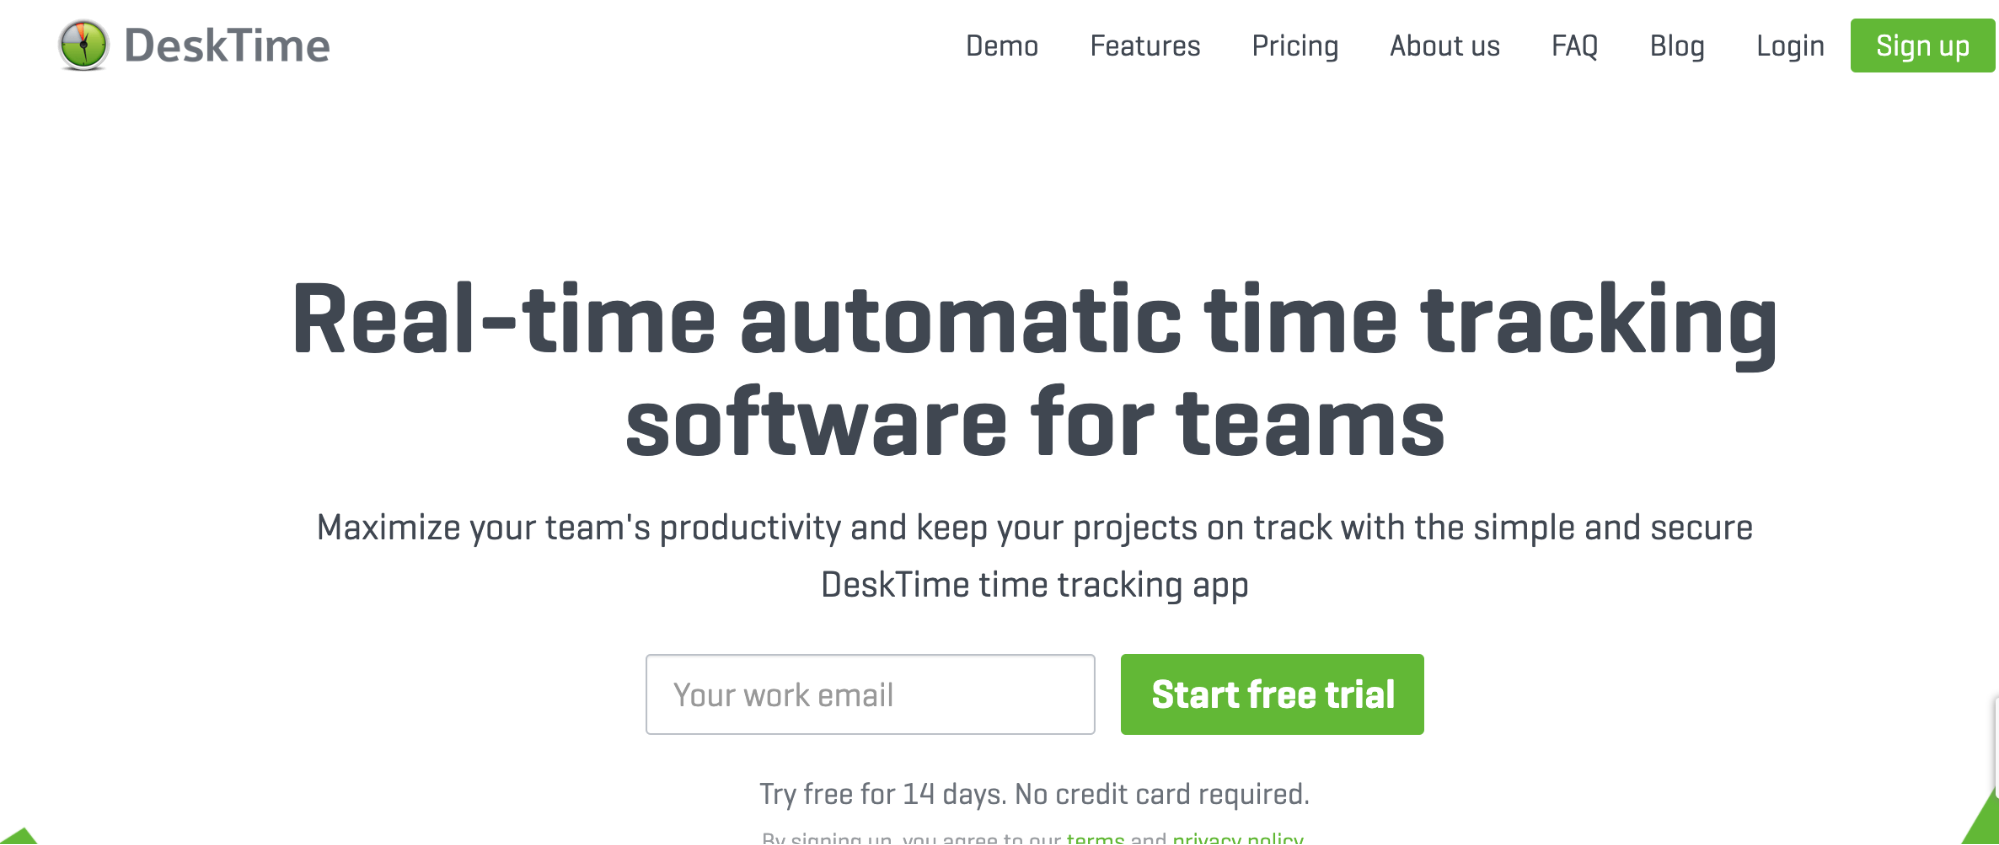 Homepage of DeskTime, with title "Real-time automatic time tracking software for teams"